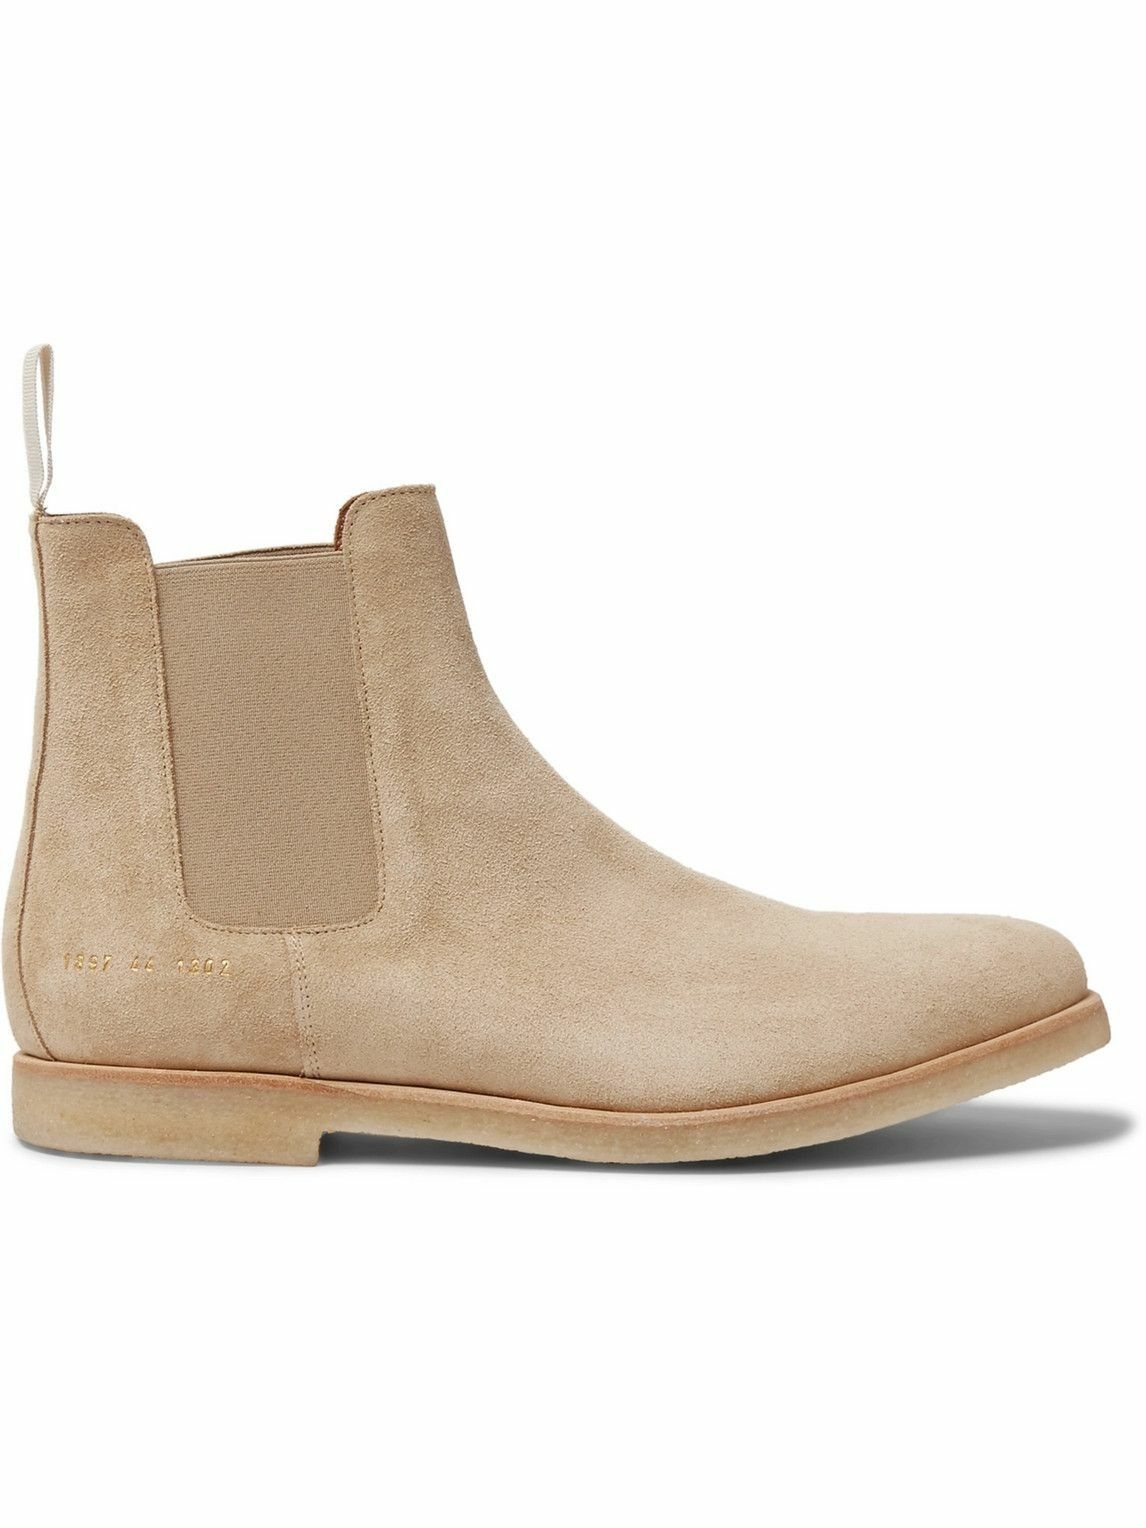 Common Projects - Suede Chelsea Boots - Neutrals Common Projects